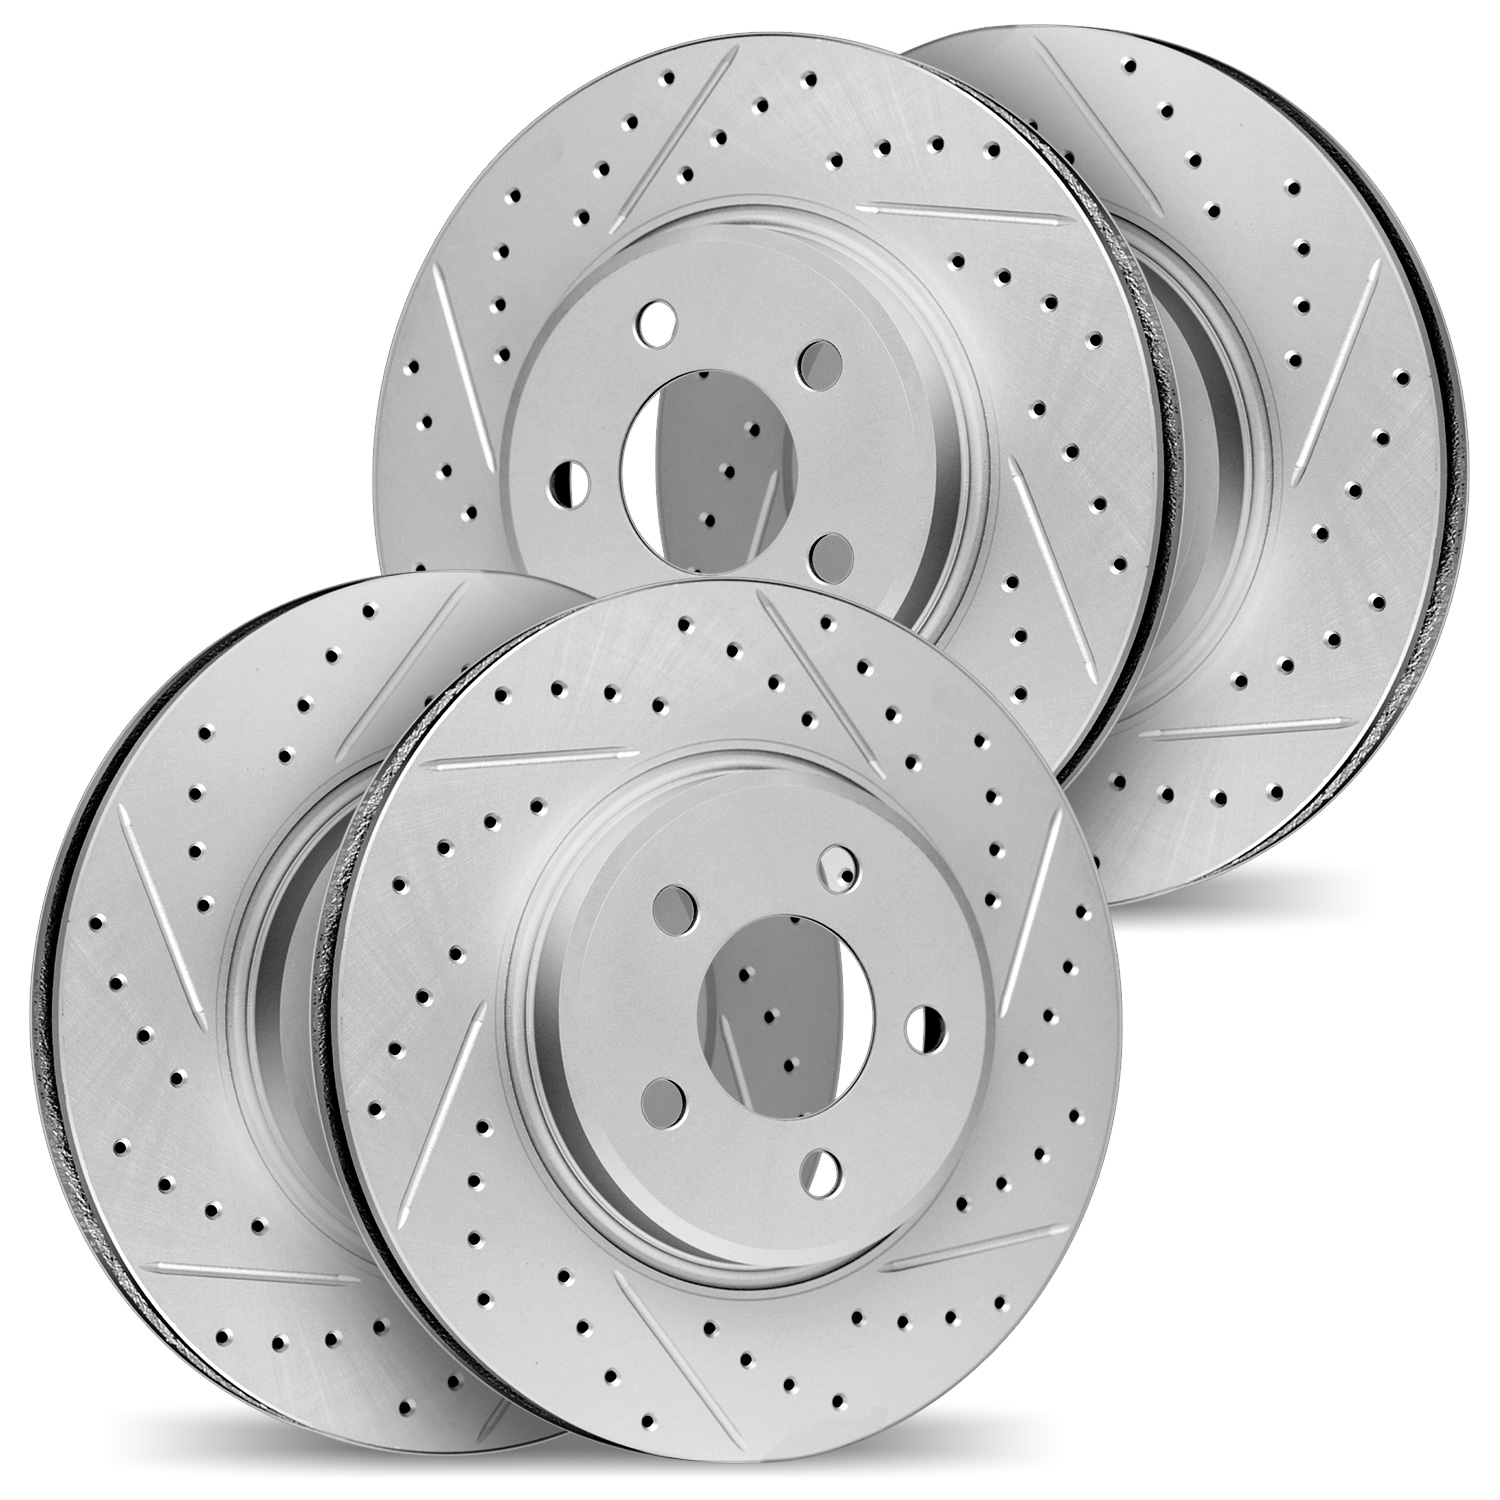 2004-47031 Geoperformance Drilled/Slotted Brake Rotors, 2007-2015 GM, Position: Front and Rear